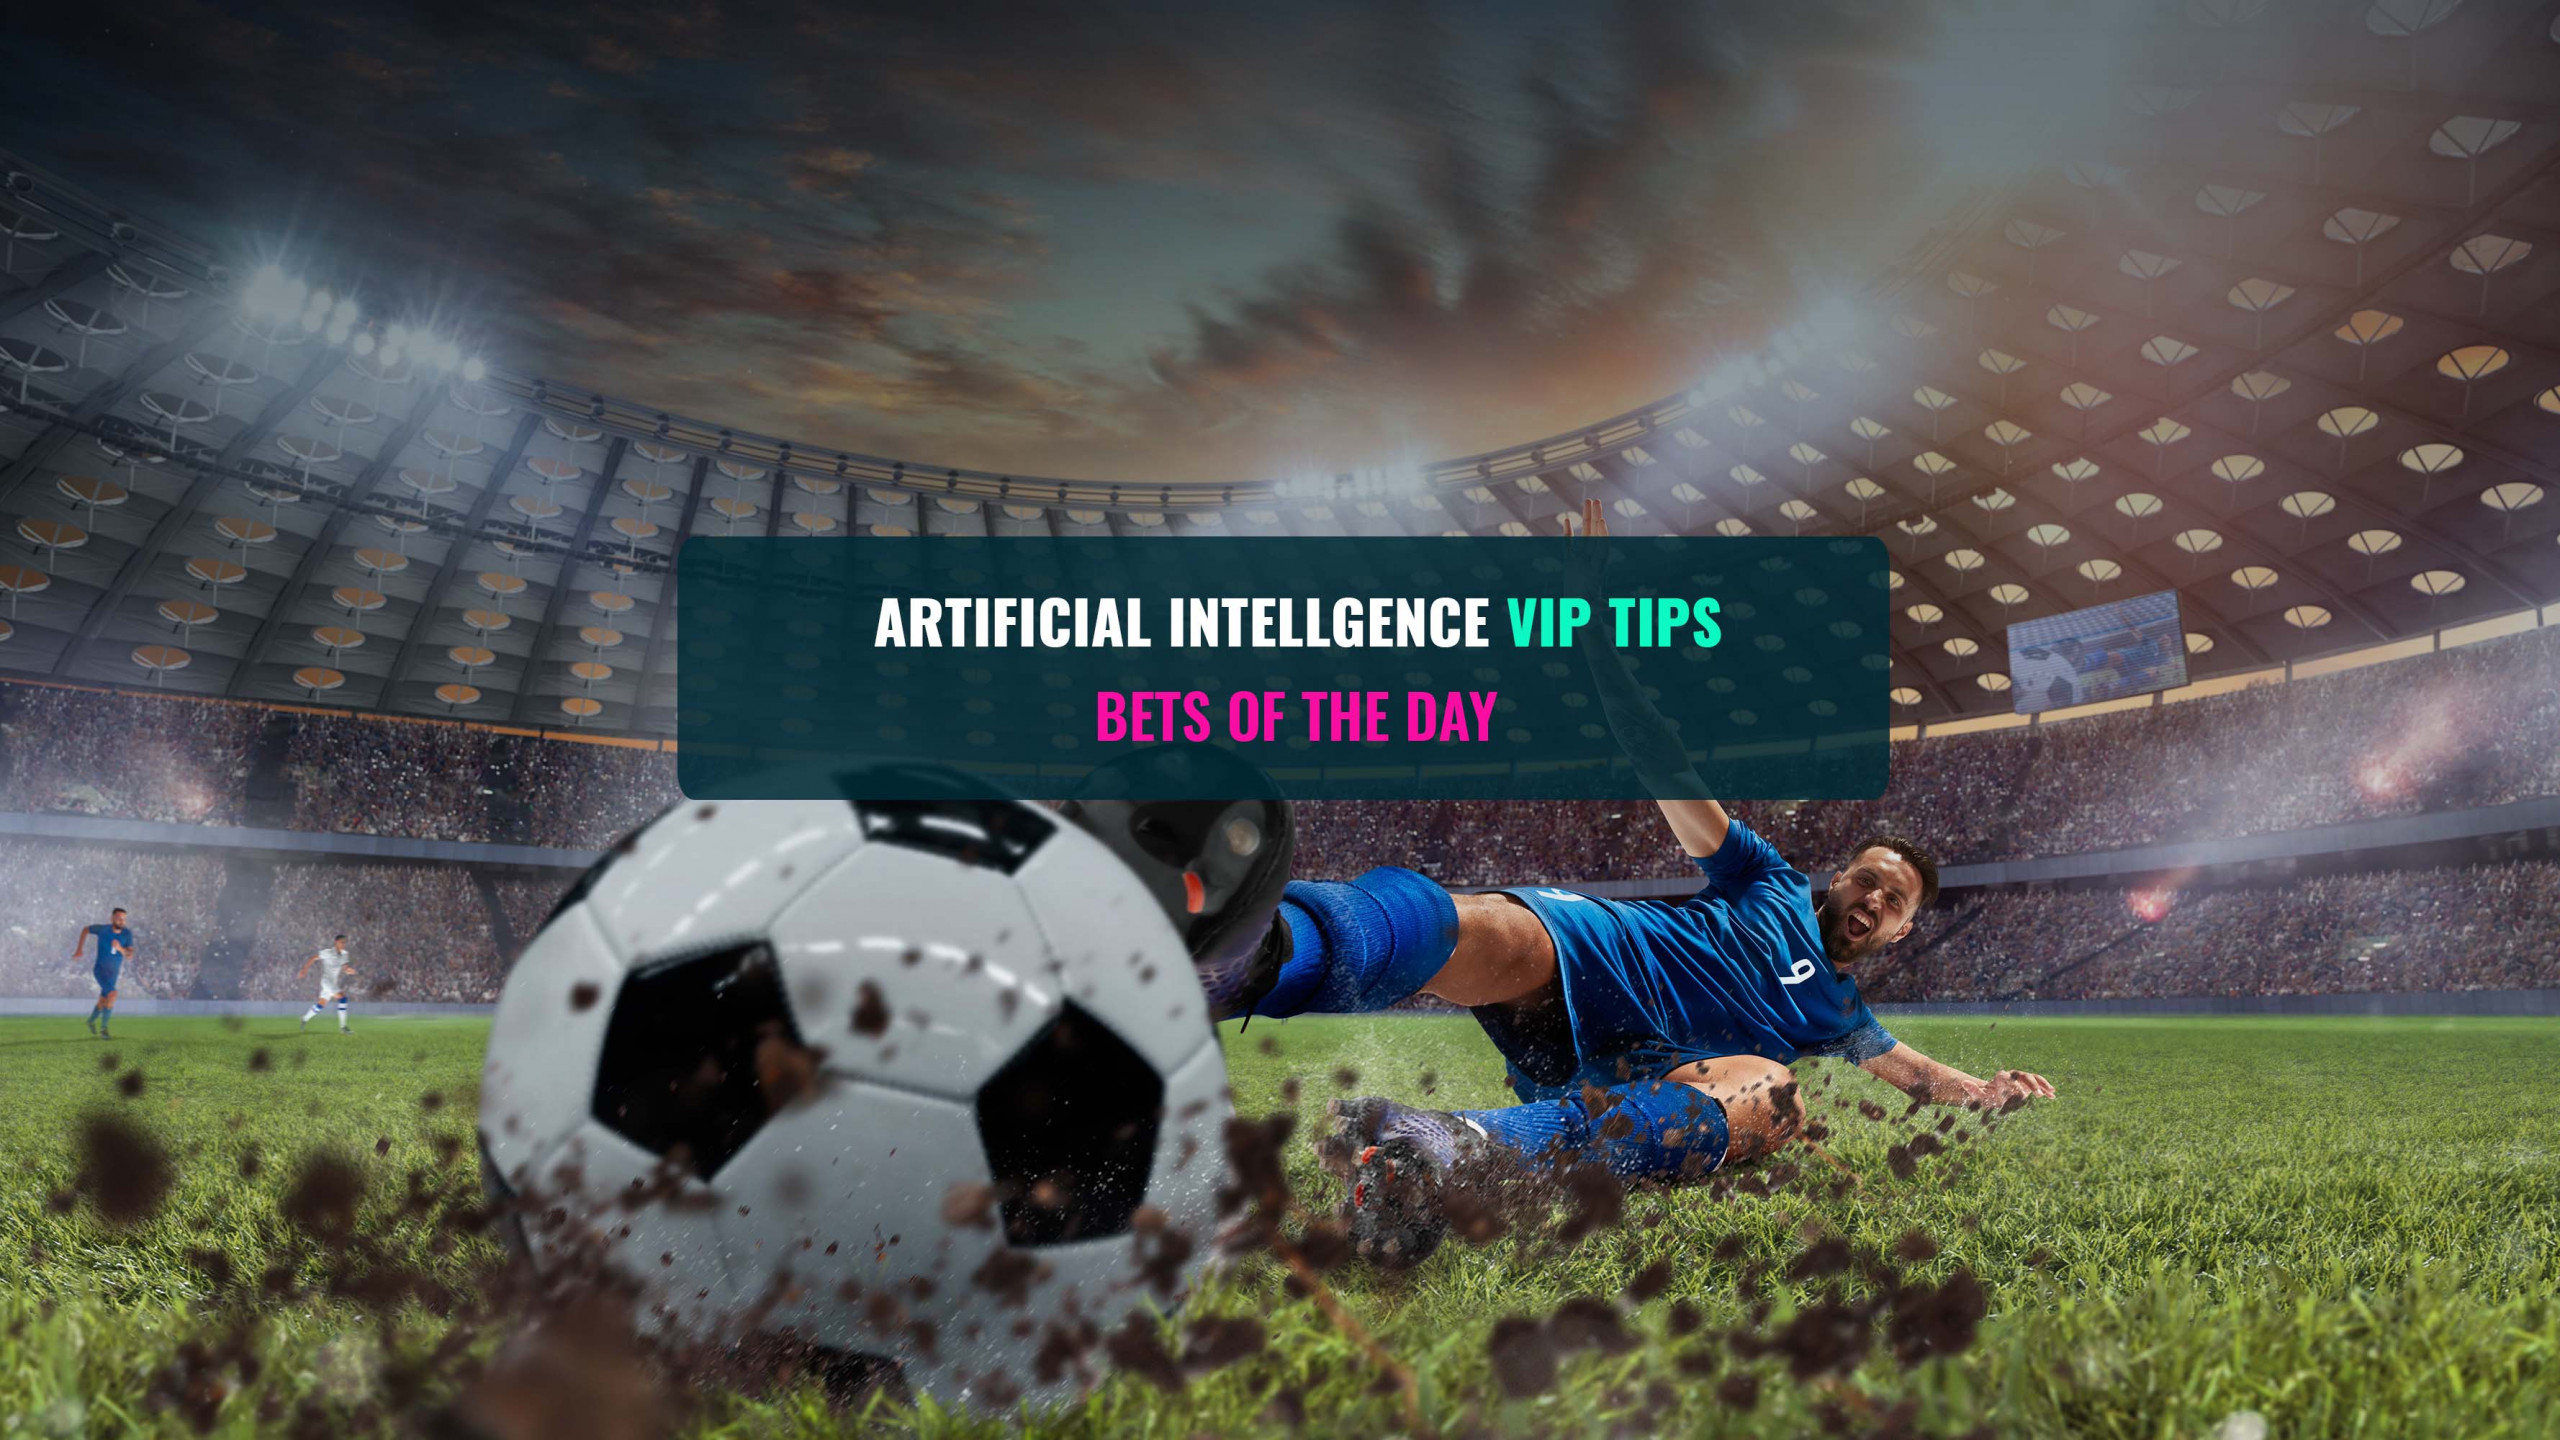 ✔️ Football Tips ✔️ Goaliero.com - Machine Learning Football Tips - Bets of the day - Artificial Intelligence Tips